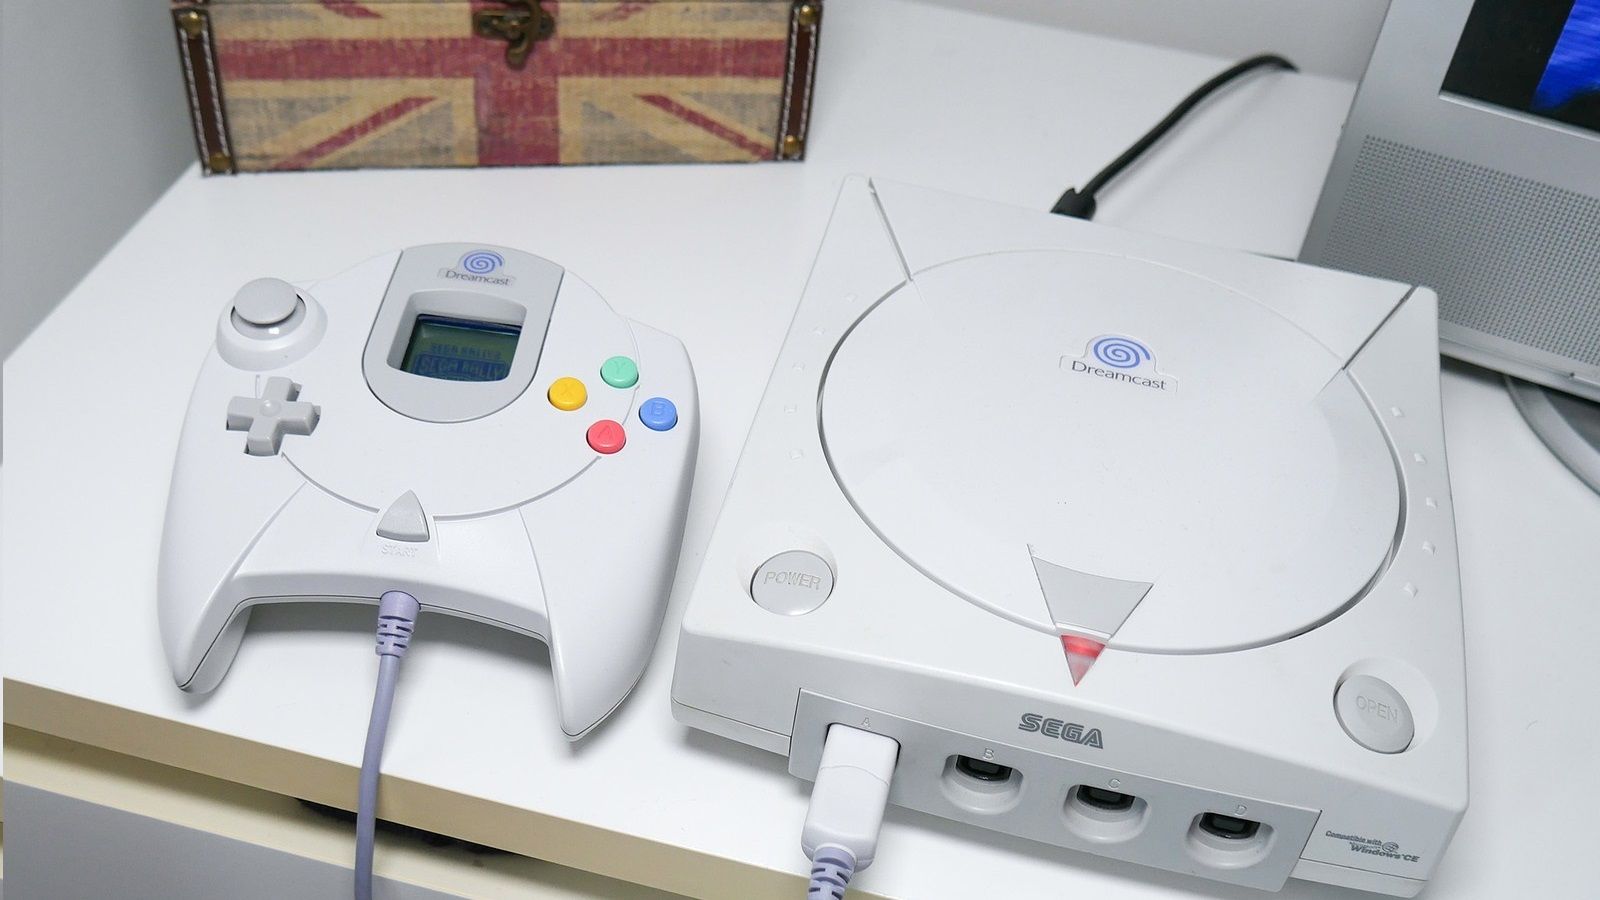 10 Best Consoles Of The 90s